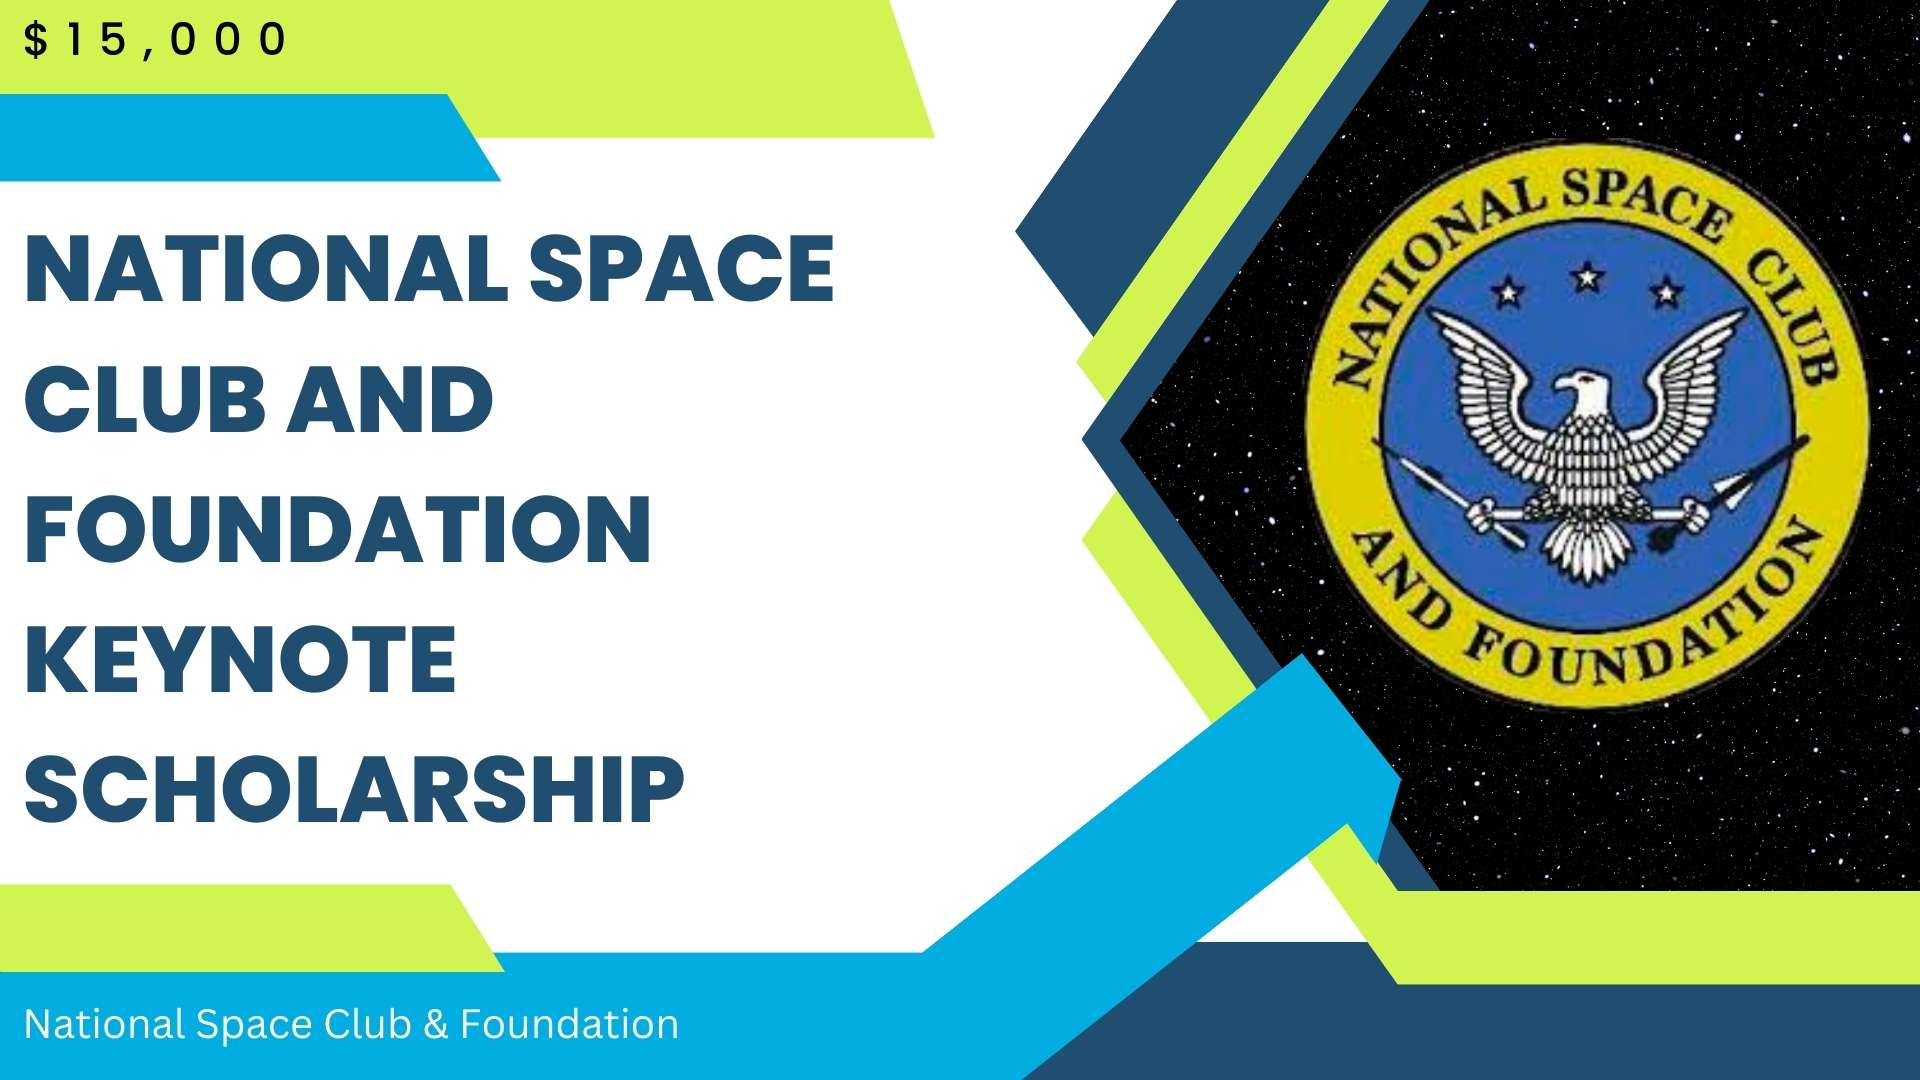 National Space Club and Foundation Keynote Scholarship